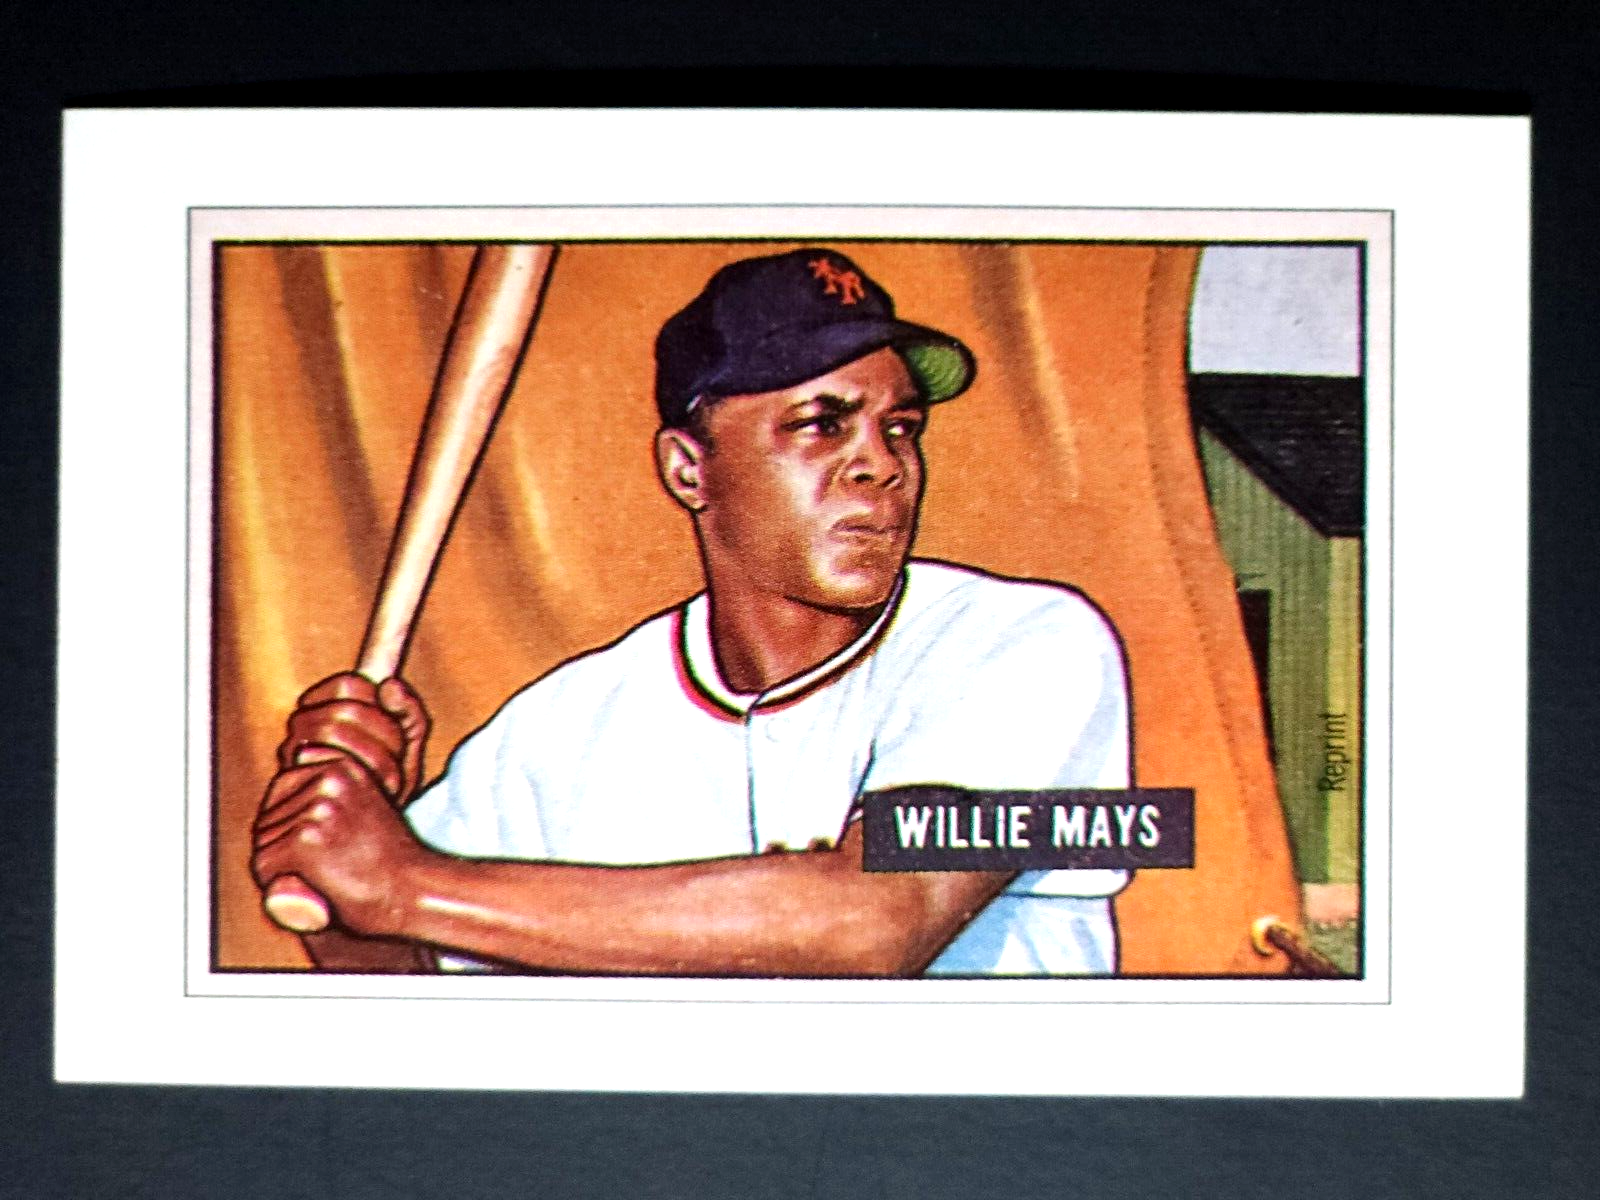 1989 Bowman Baseball Sweepstakes Card Willie Mays Rookie Reprint *NRMT/MINT*. rookie card picture